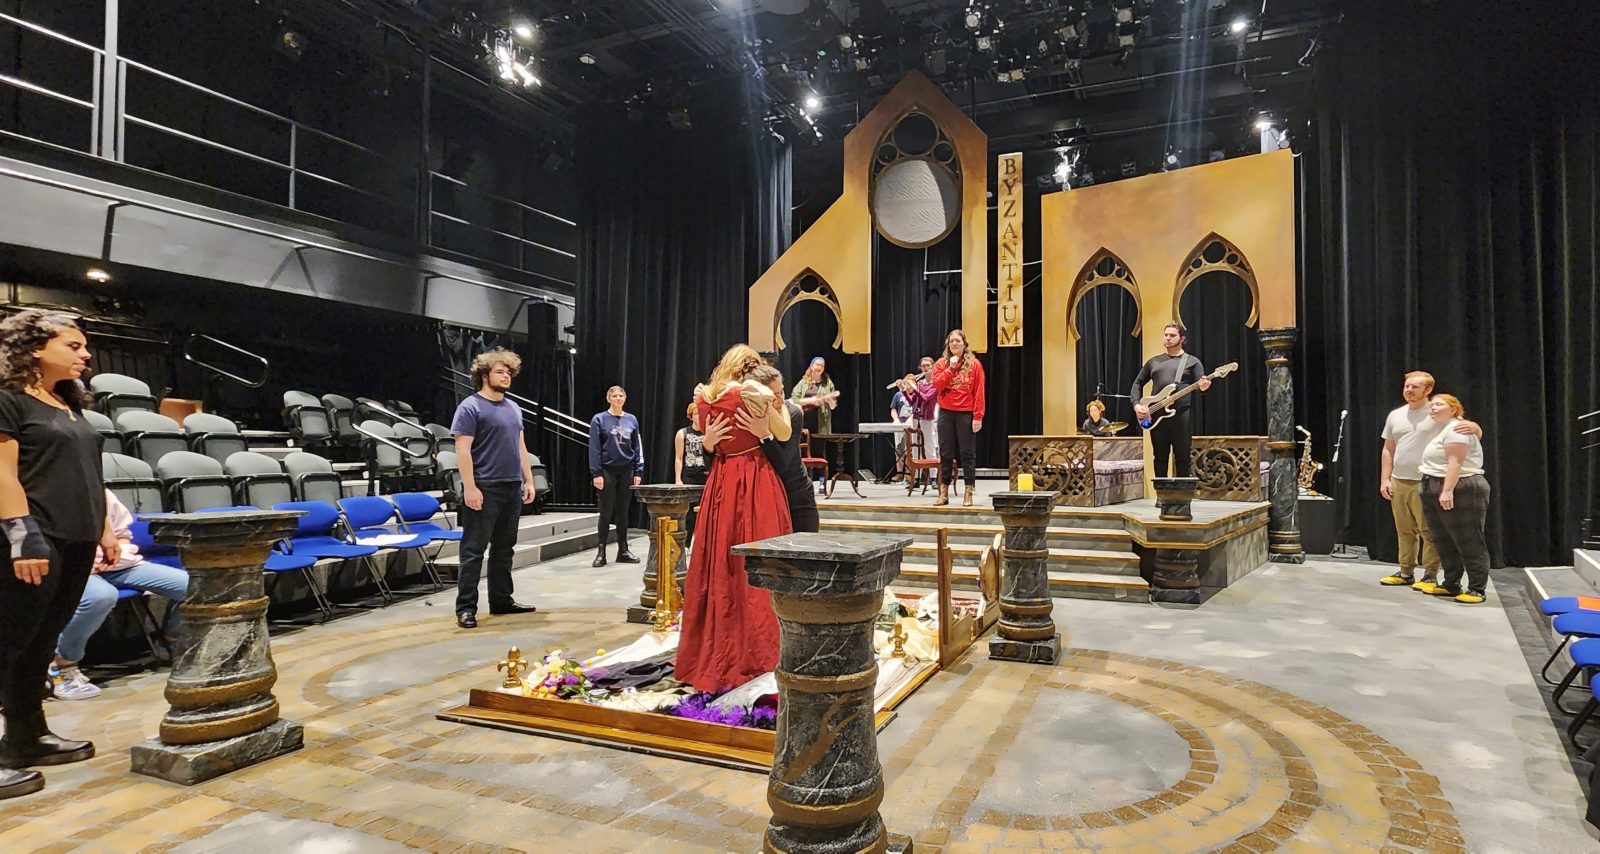 A group of students rehearsing a play circled around a theatre set.